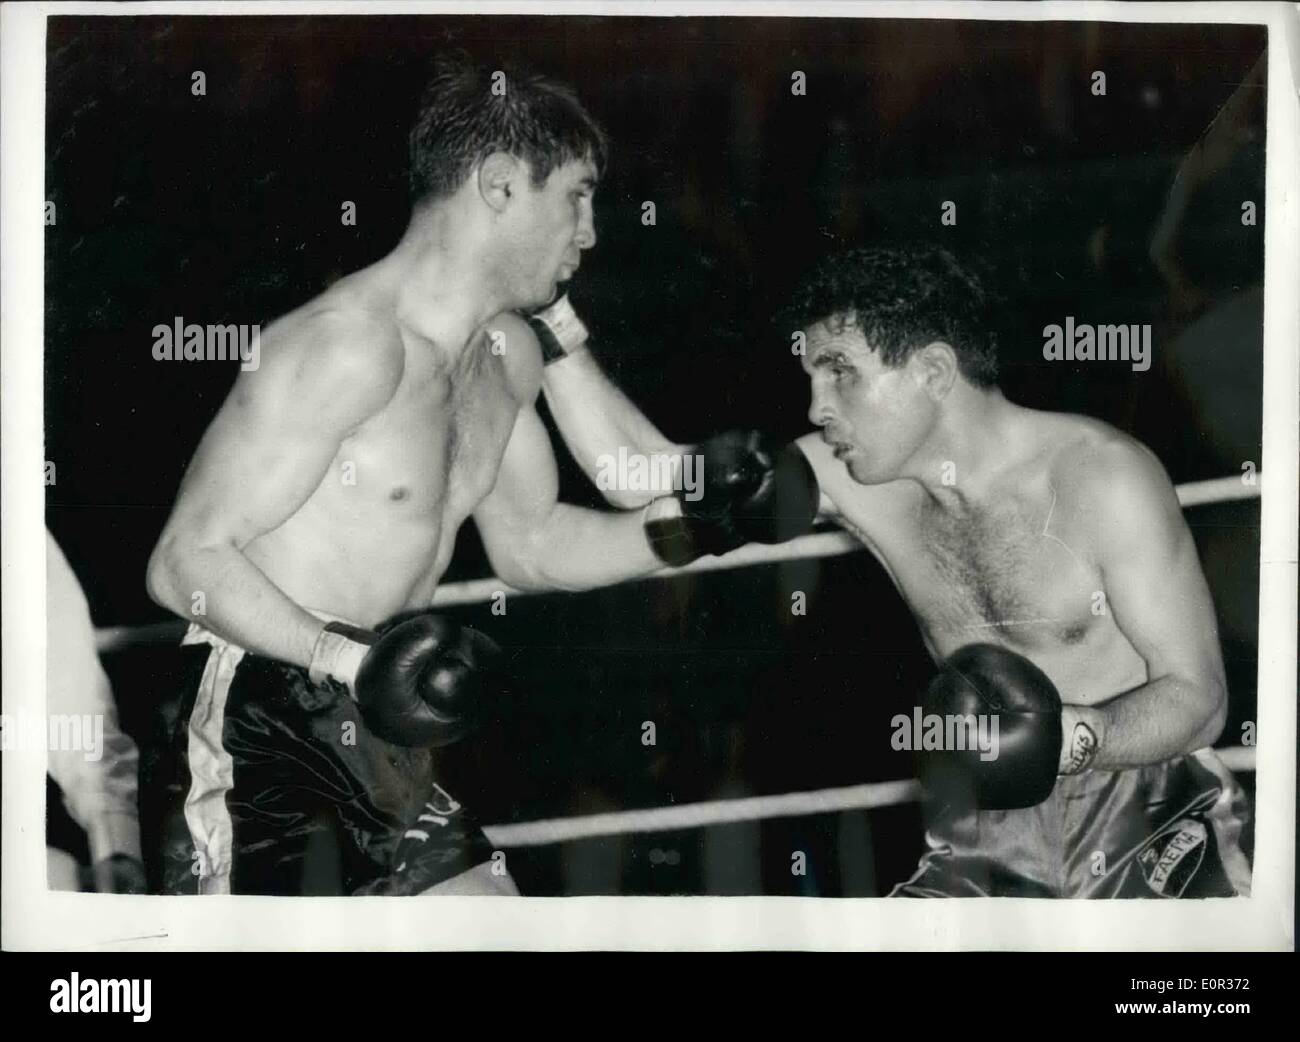 Nov. 11, 1957 - Willie Toweel Beats Jose Hernandez When Referee Stop The Contest In The Ninth Round: Willie Toweel, South African holder of the Empire Lightweight title, beat the Spanish Southpaw, Jose Hernandez, when the referee stopped the contest in the ninth round of their ten-round international lightweight contest at the Albert Hall, London, this evening. Hernandez sustained a badly out eye. Photo shows Willie Toweel (left) about to deliver a left hook as he slips inside Hernandez's right. Stock Photo